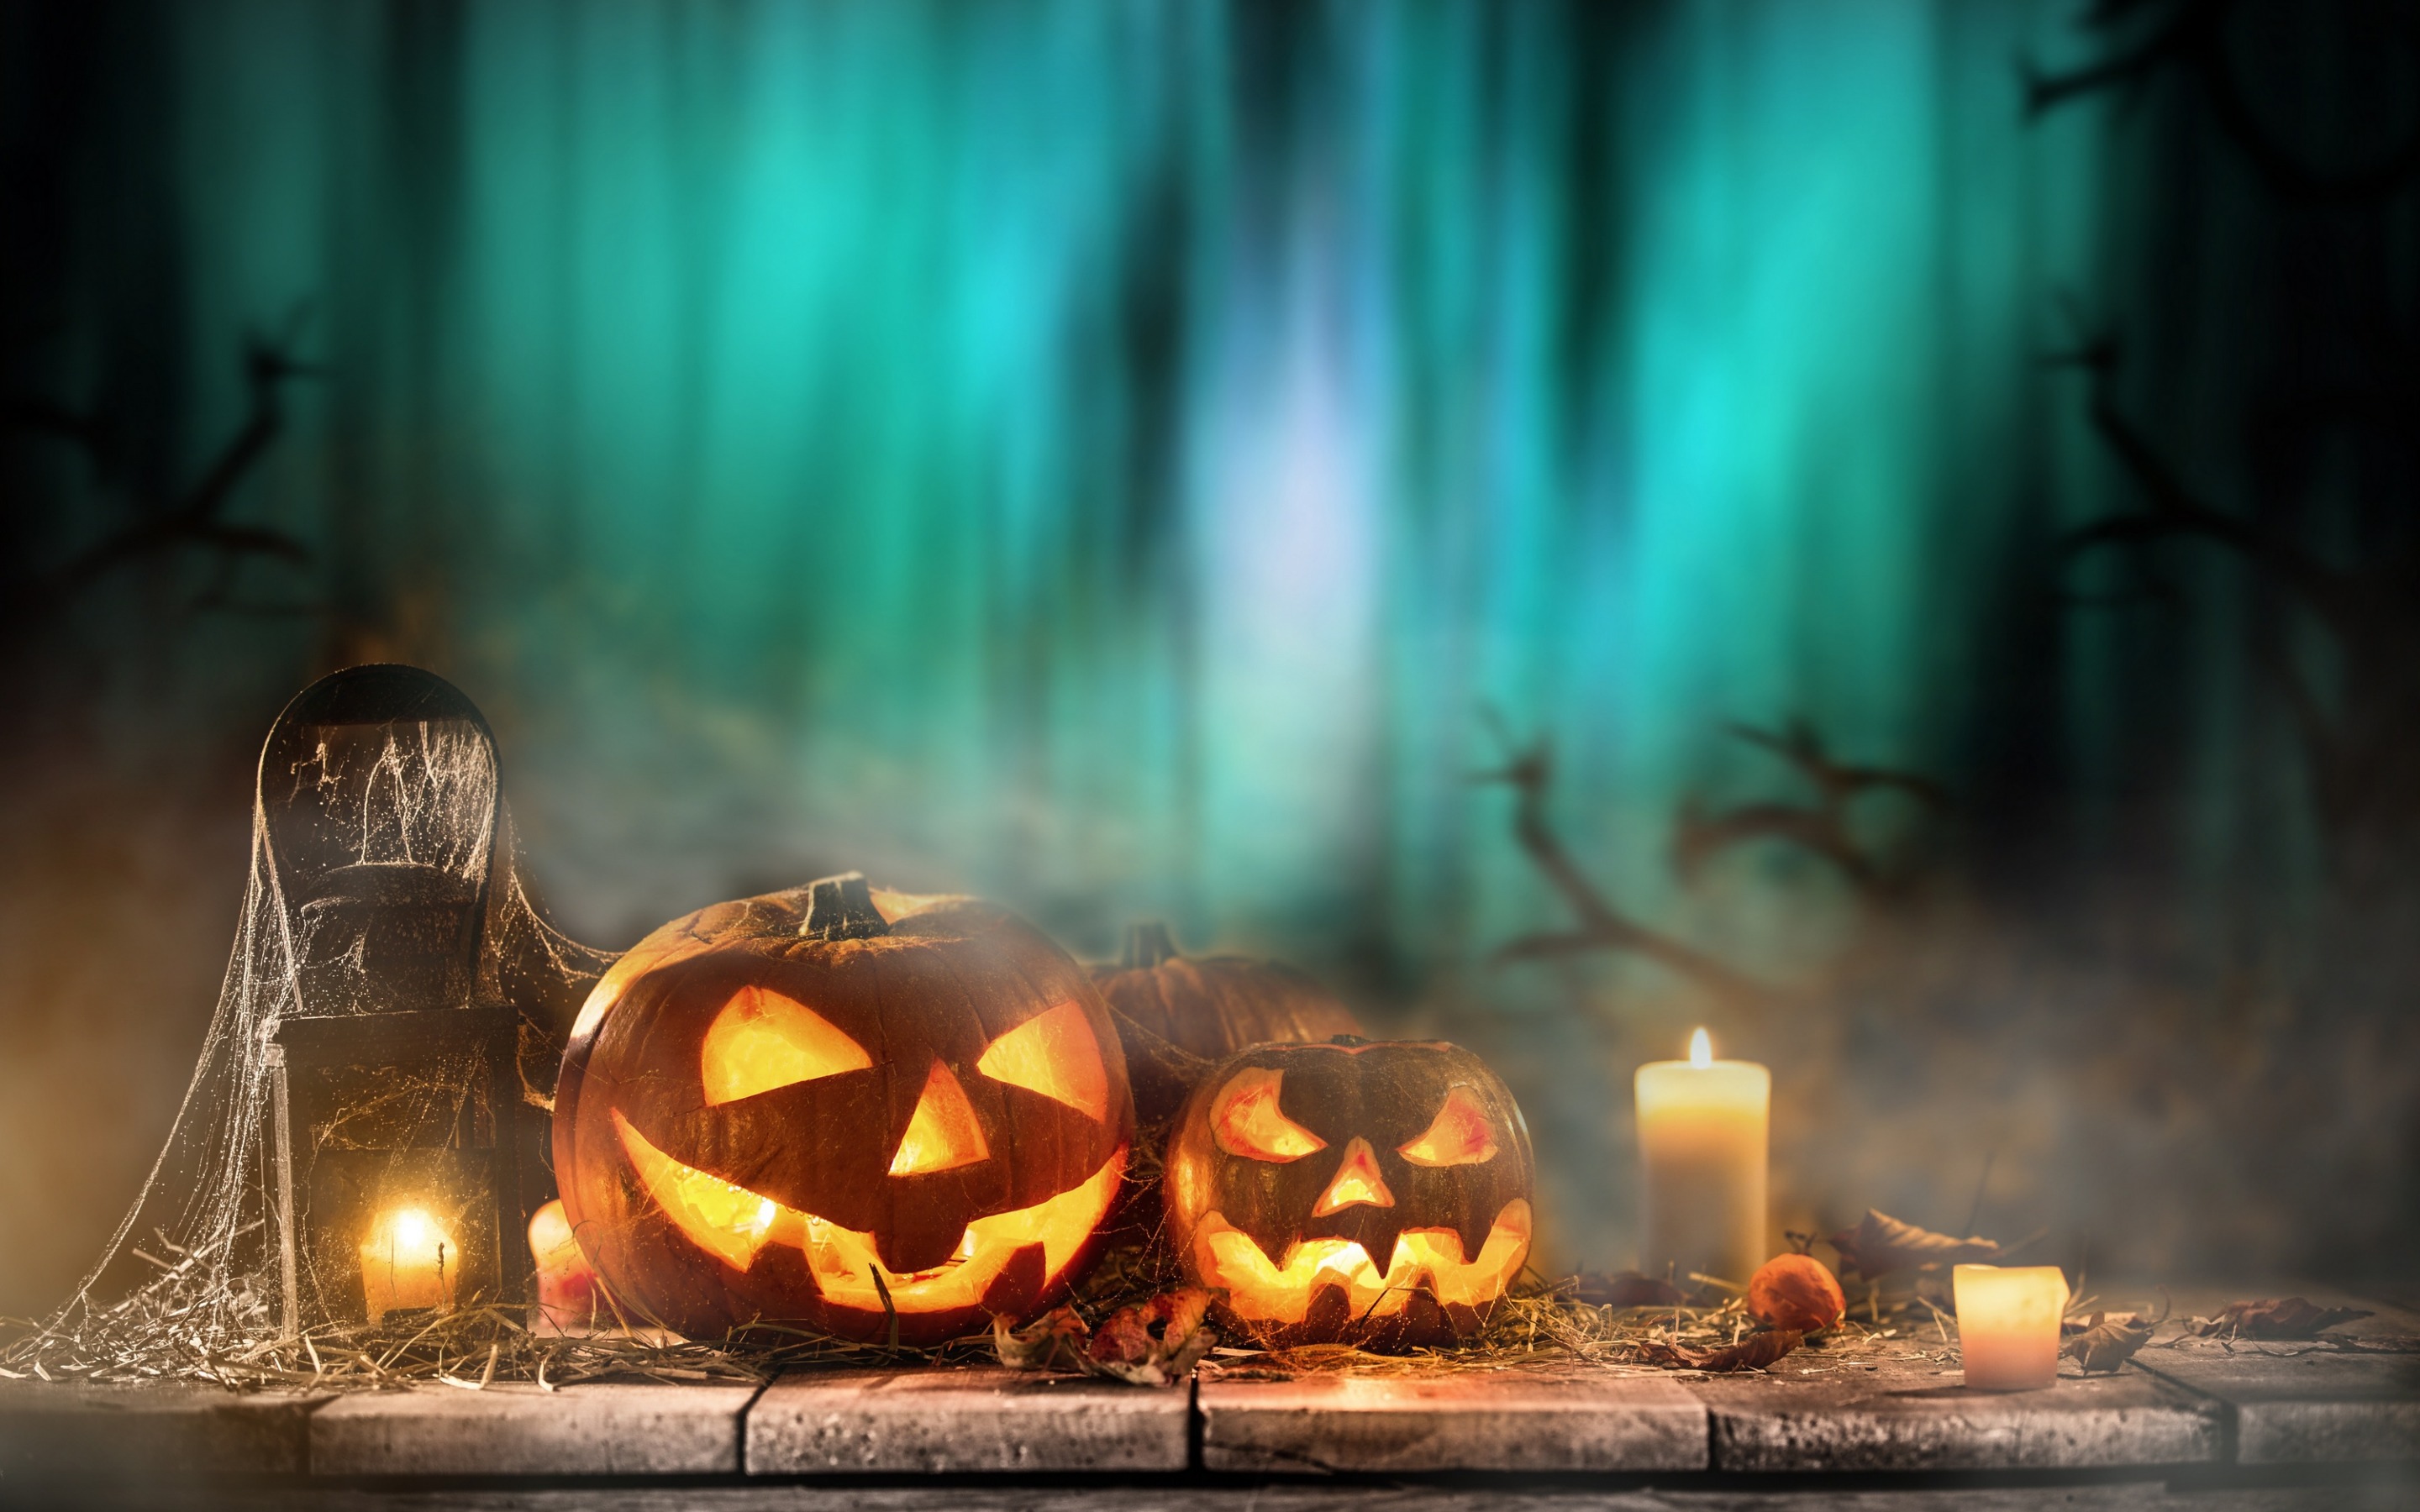 Download wallpaper Halloween, pumpkins, night, forest, candles, October autumn holidays for desktop with resolution 2880x1800. High Quality HD picture wallpaper